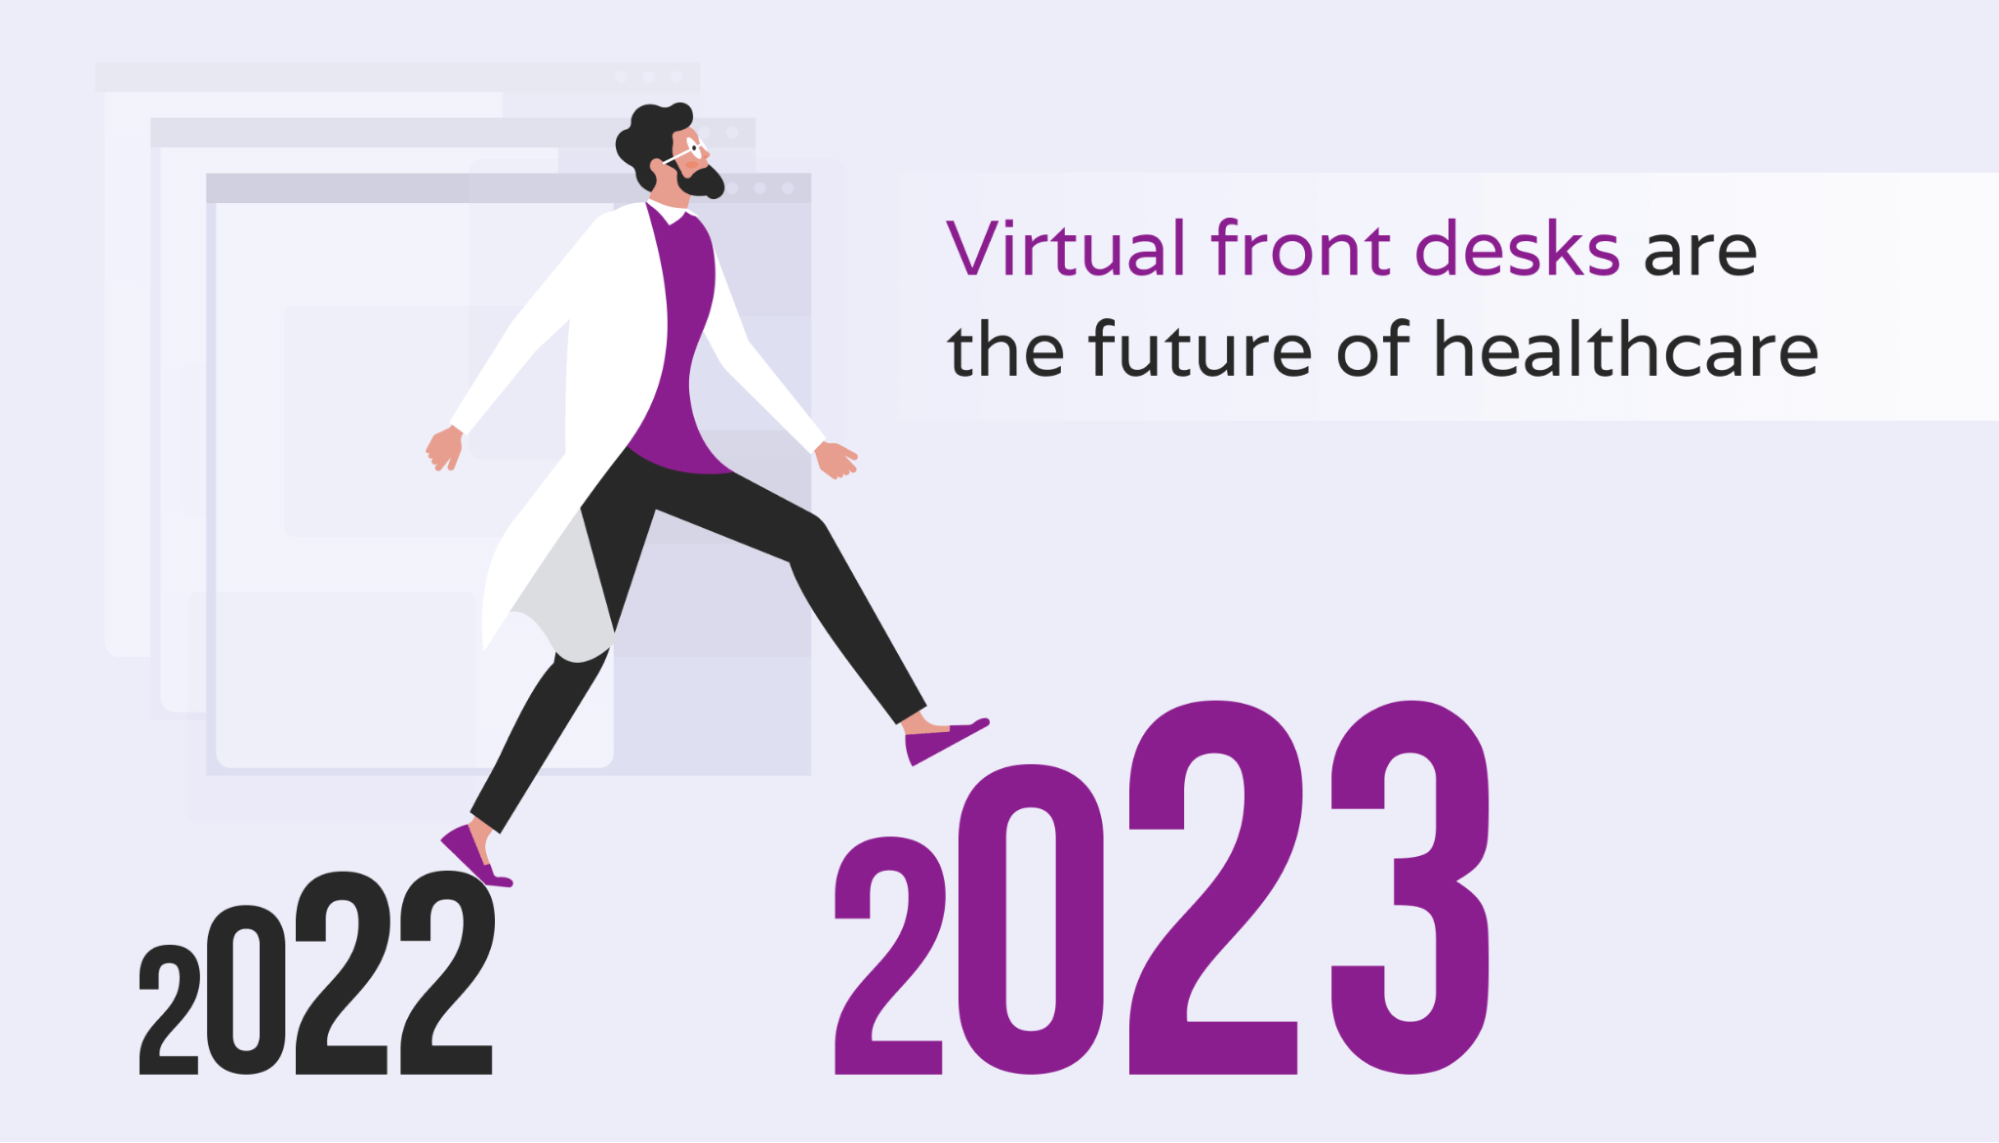 Illustration showing virtual receptionist and the future of healthcare